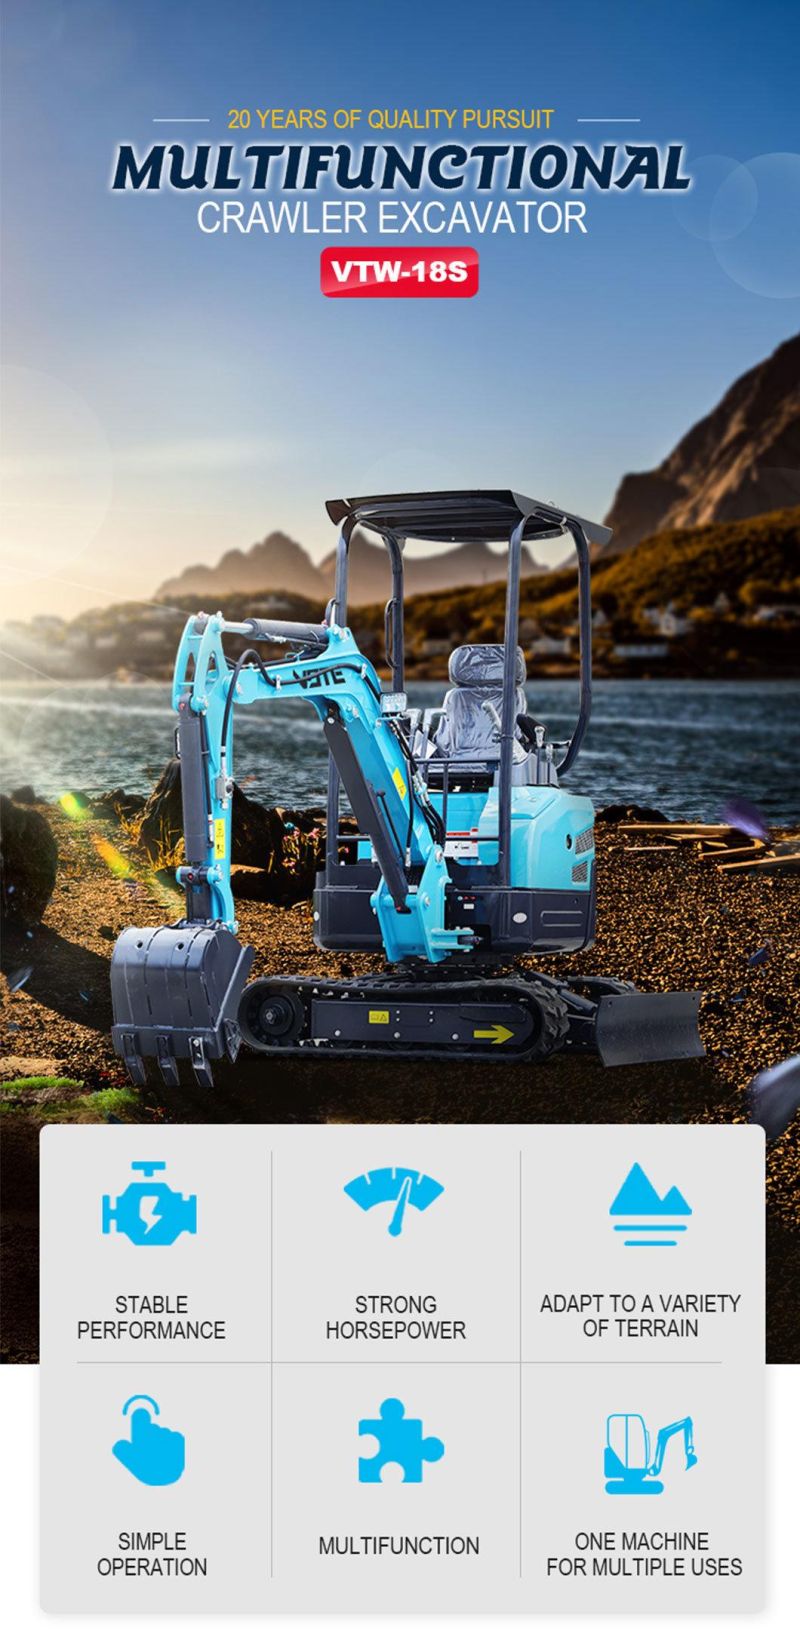 High Quality Mini Excavator 1.8 Ton Cheap Small Digger Mini Excavator Cheap Price for Sale